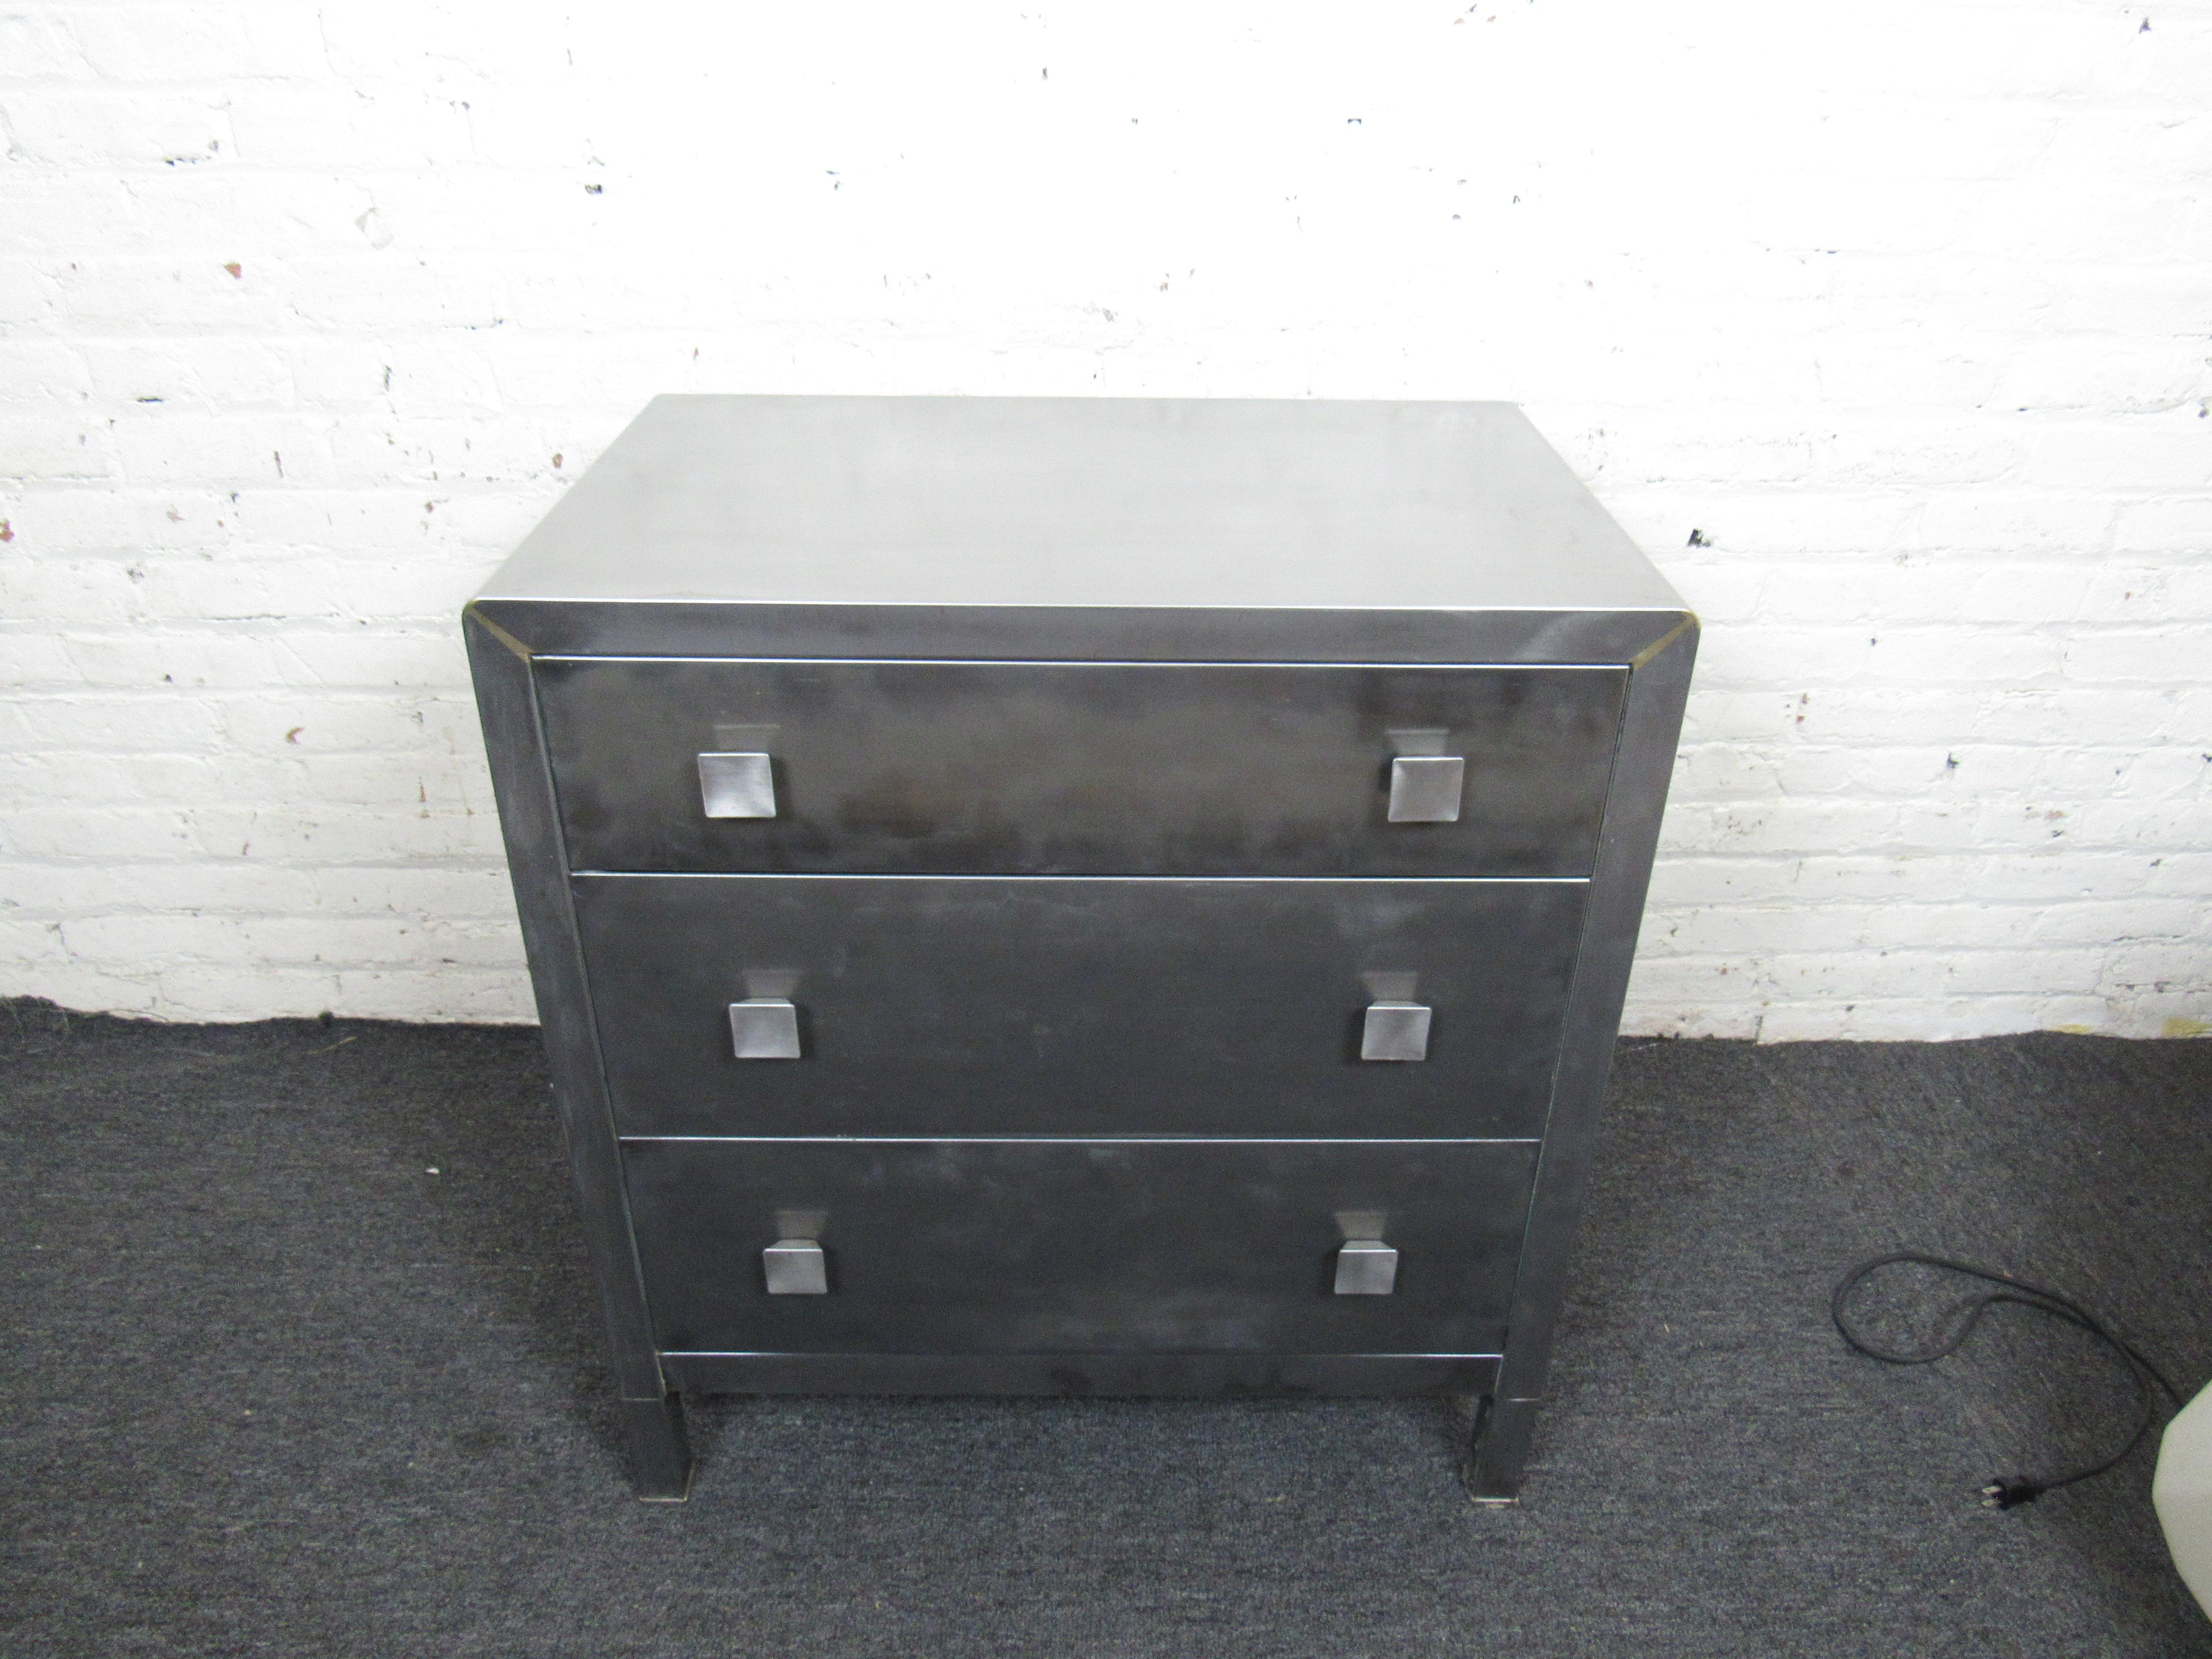 Wonderful industrial metal drawers made by Simmons. Three large sliding drawers for ample storage. Great organization option for a bedroom or a workshop. Please confirm item location with seller (NY/NJ).